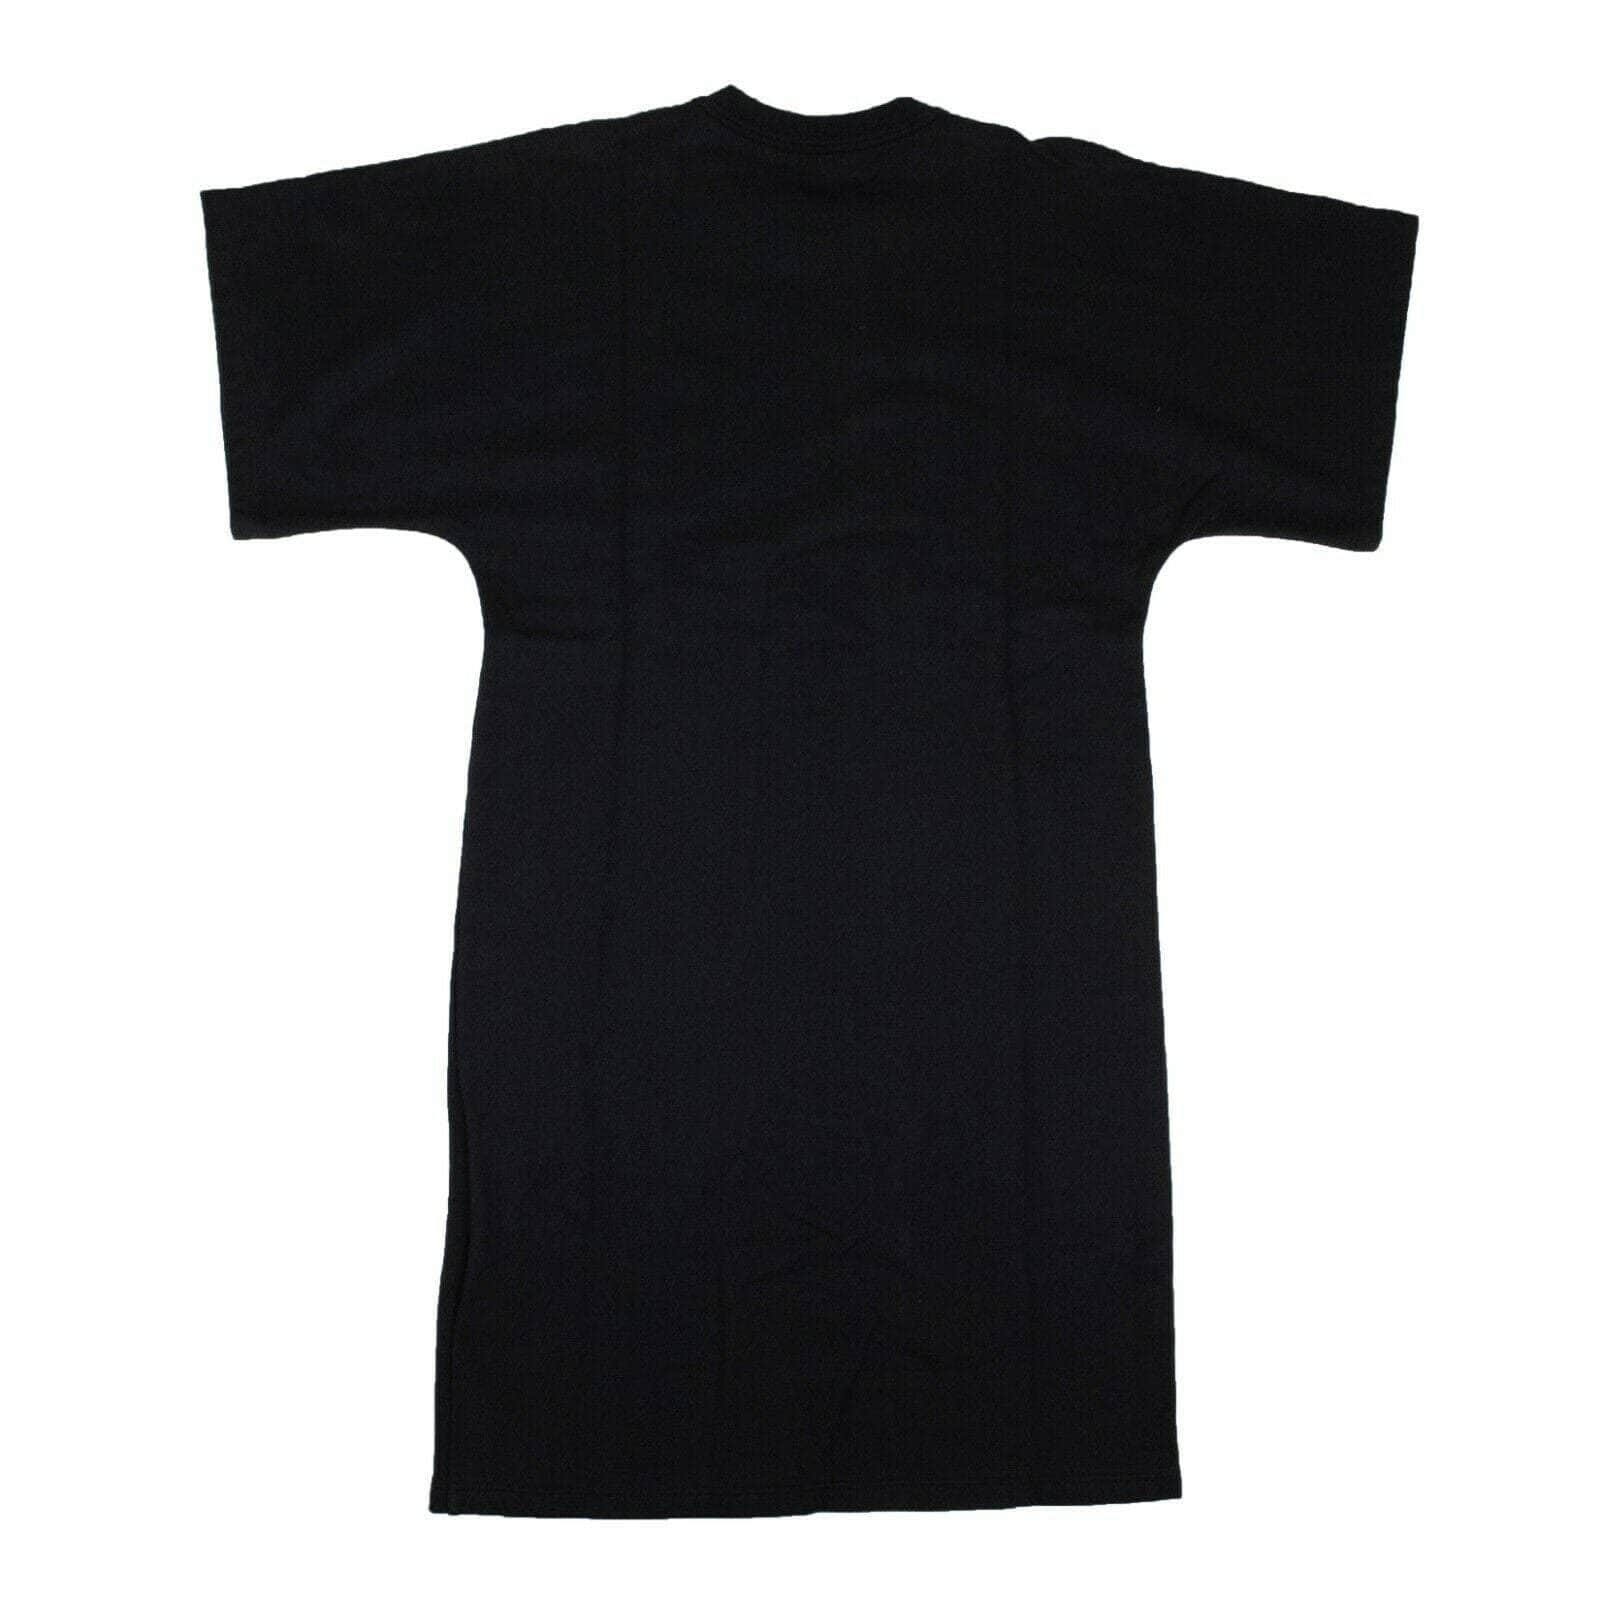 A_PLAN_APPLICATION a_plan_application, channelenable-all, couponcollection, gender-womens, main-clothing, size-s, under-250 S Navy Blue Cotton T-shirt Dress 82NGG-AP-20/S 82NGG-AP-20/S